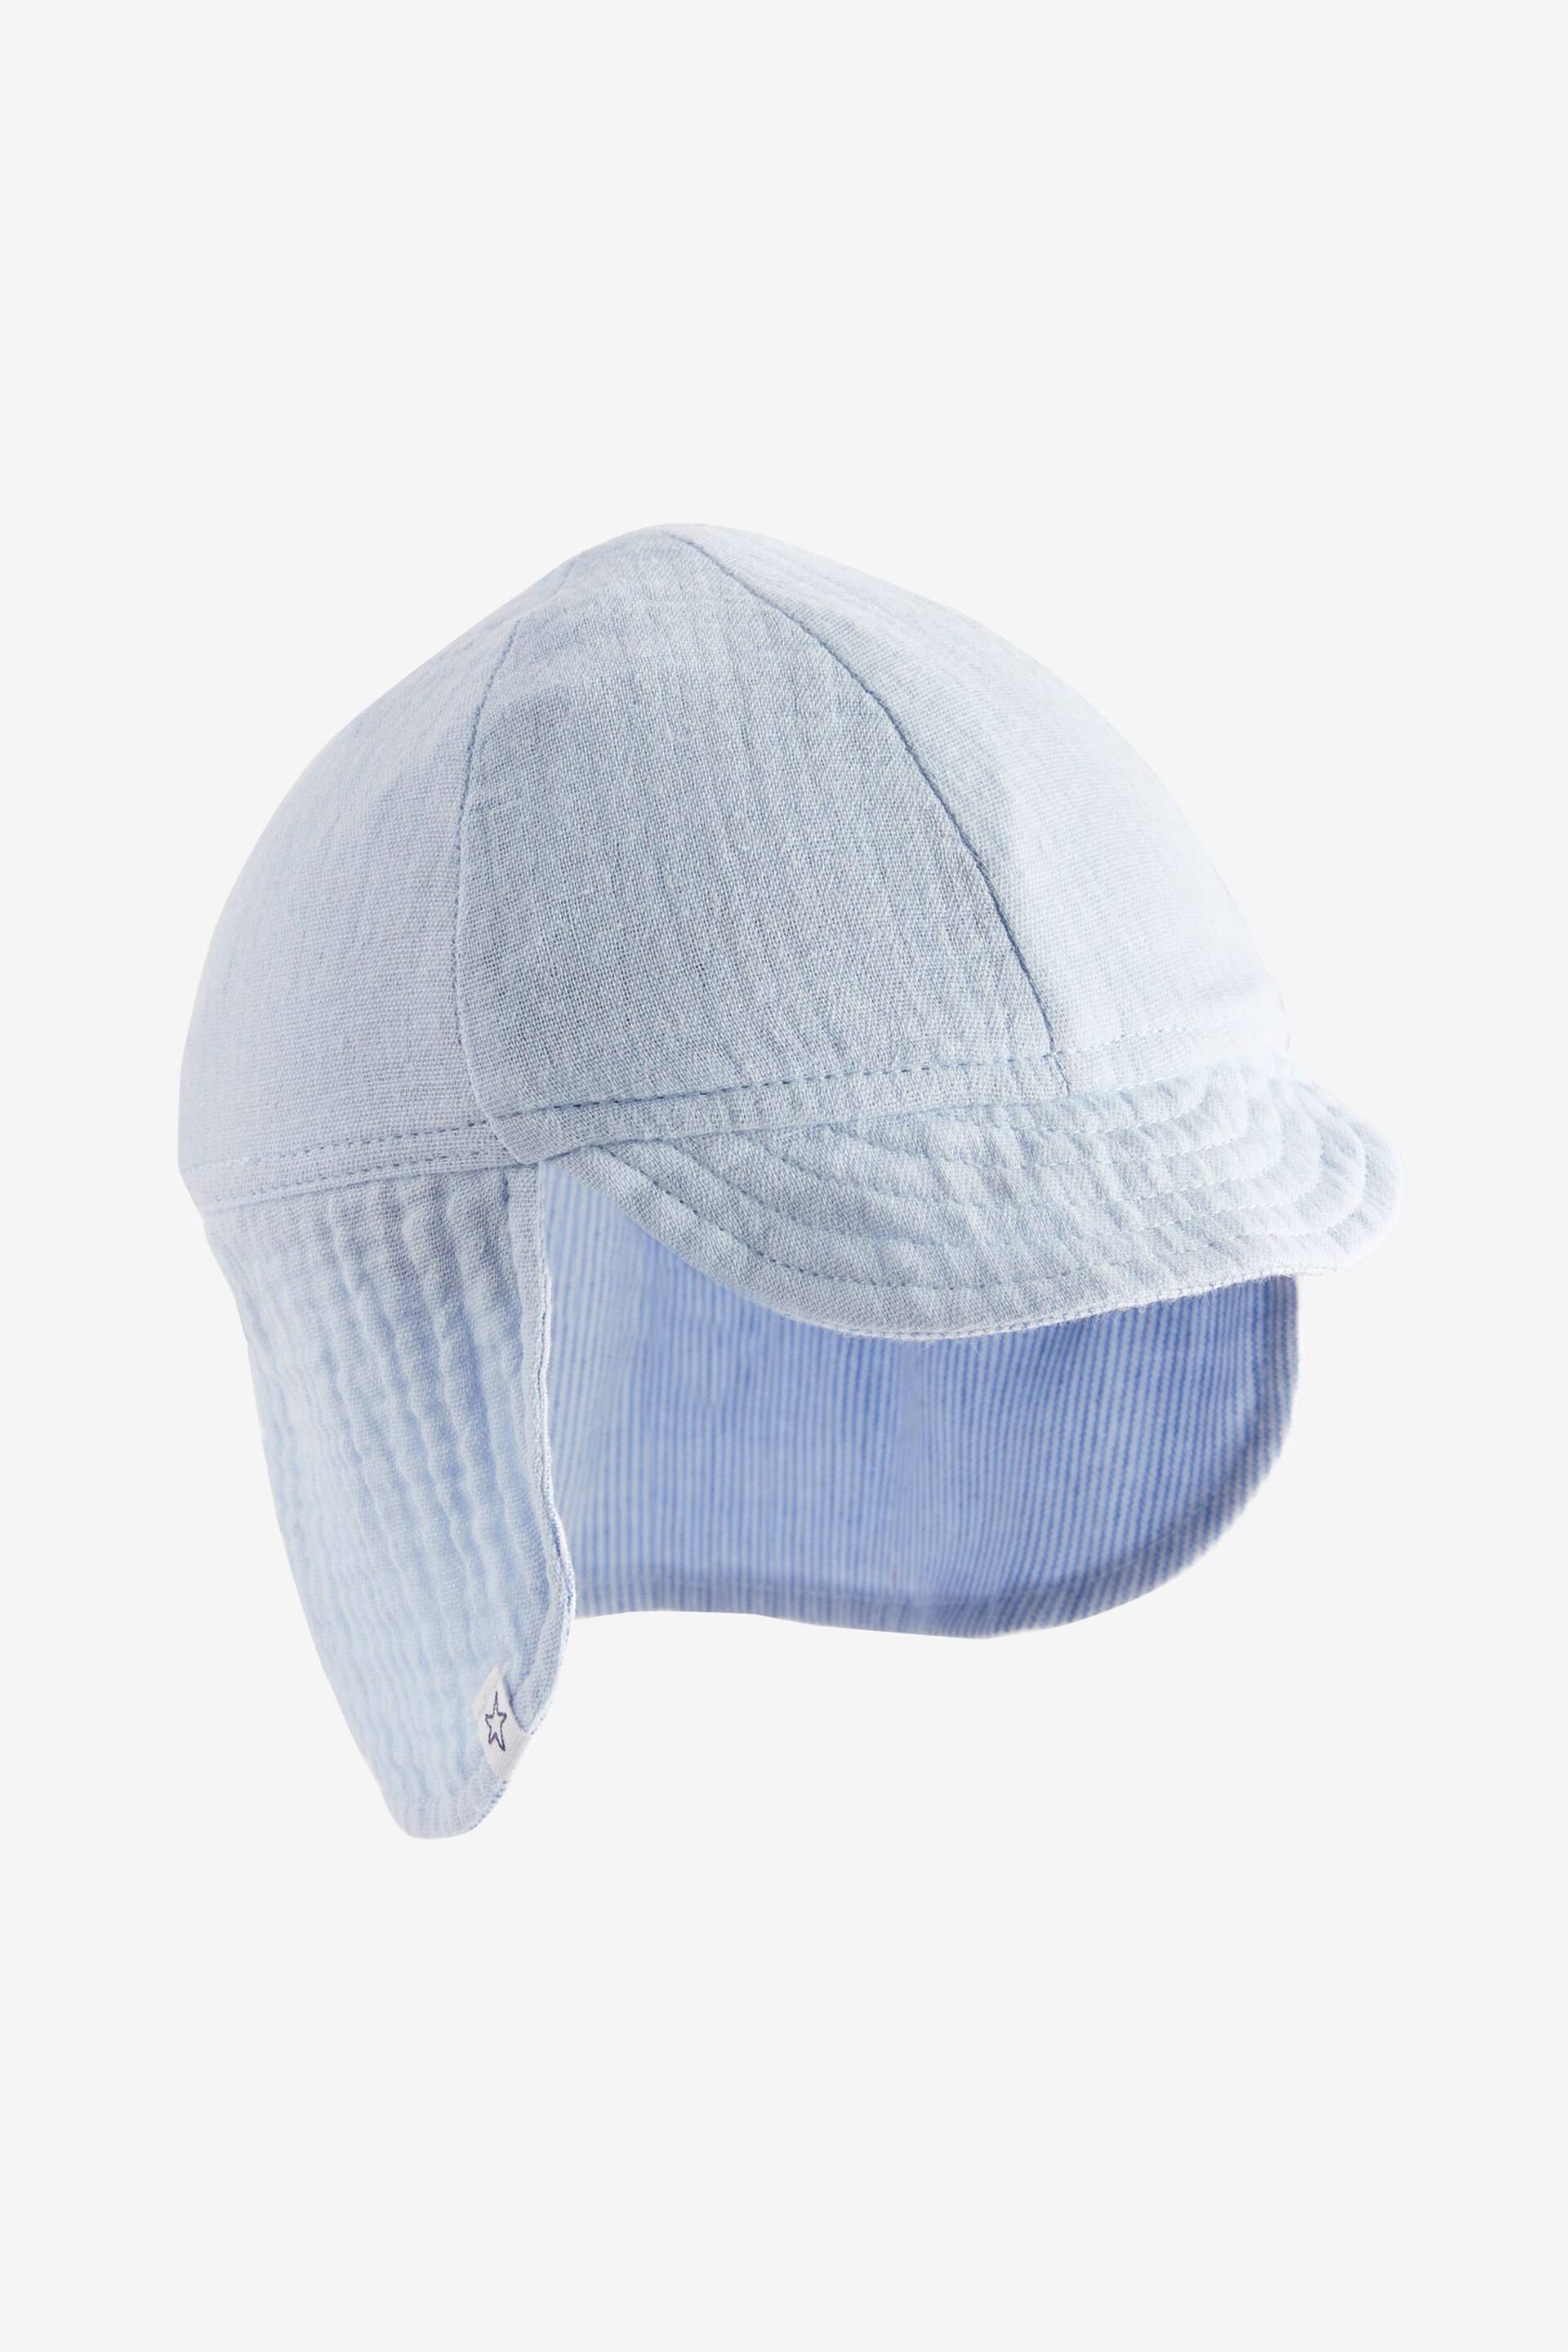 Blue Reversible Legionnaire Baby Hat (0mths-2yrs) - Image 3 of 4